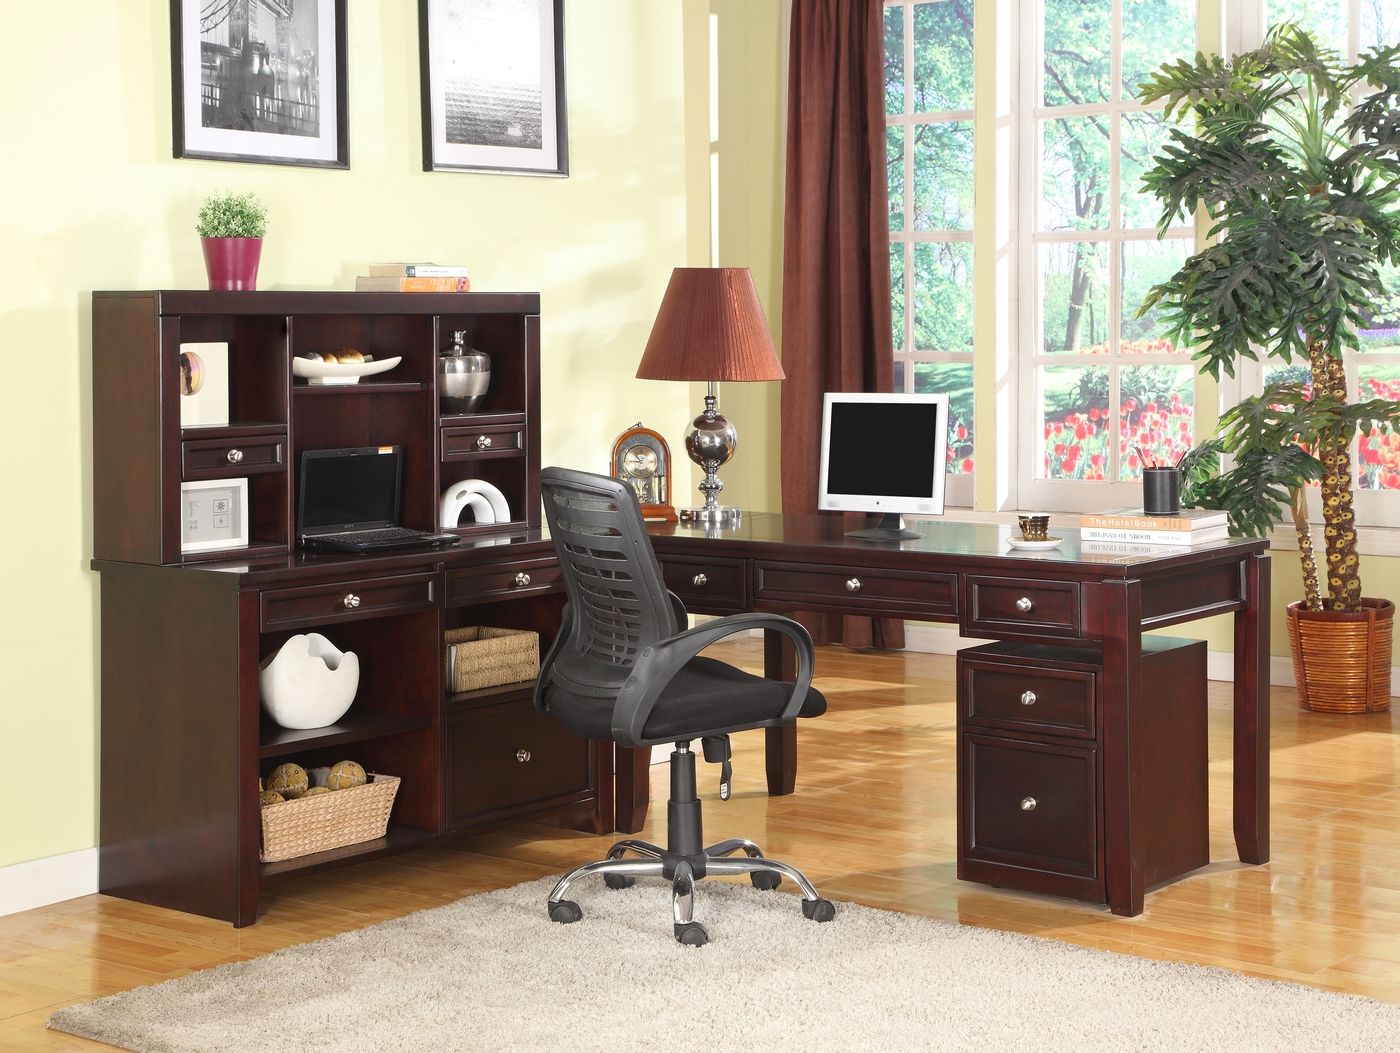 Boston Transitional Merlot Modular Office L Shaped Corner Desk Intended For Office Desks With Filing Credenza (View 5 of 15)